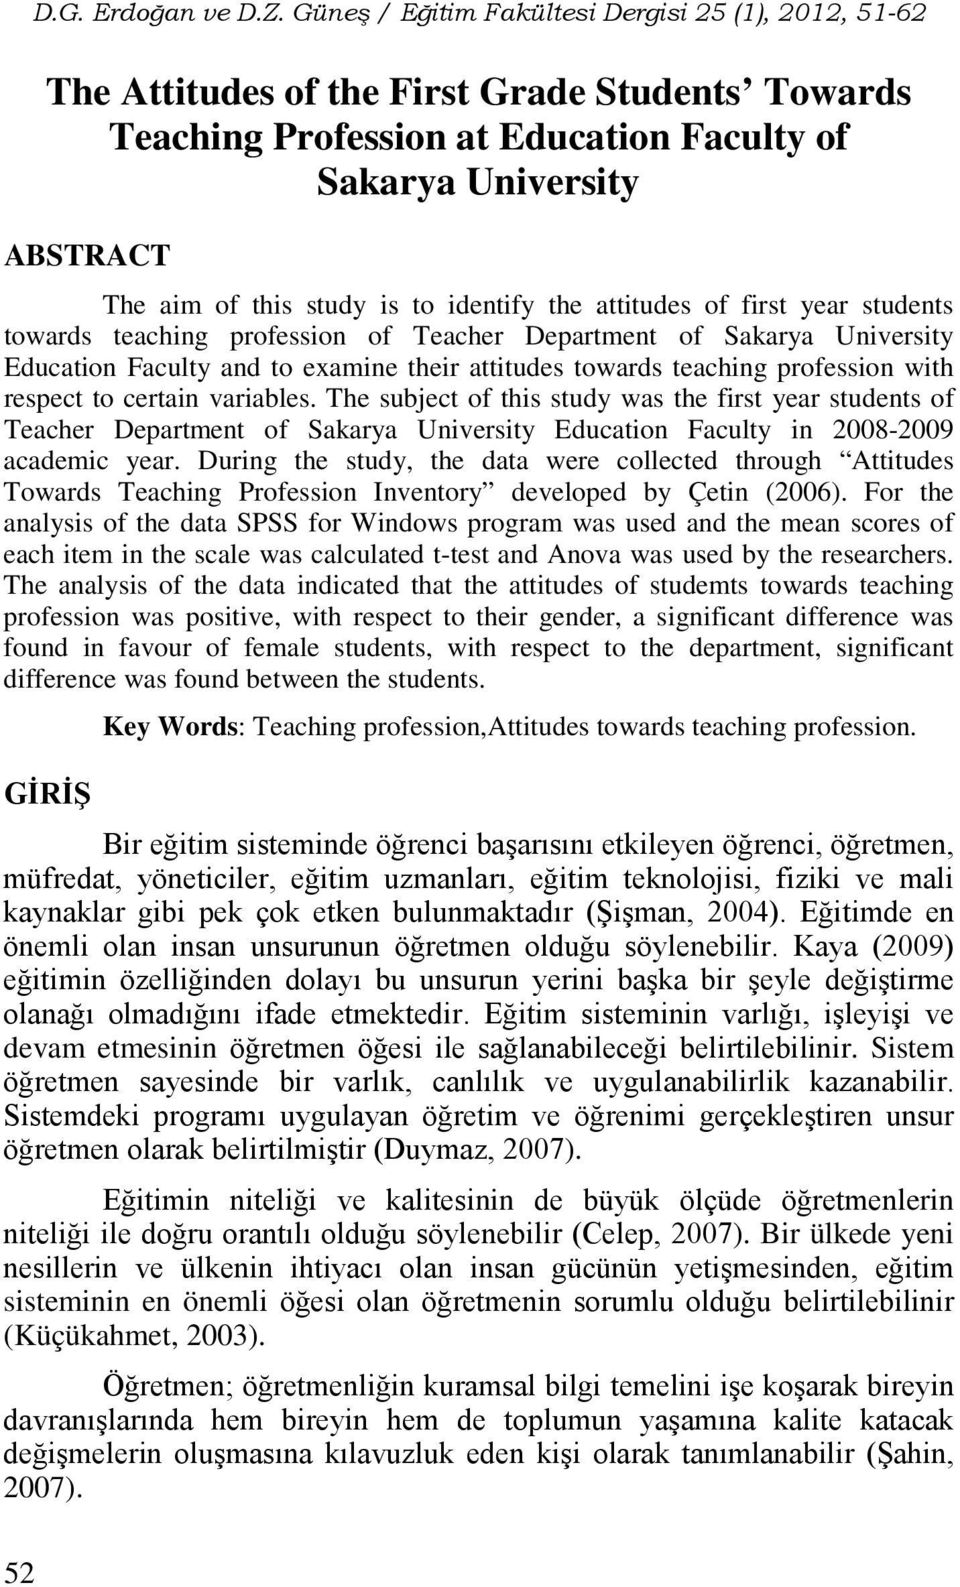 to identify the attitudes of first year students towards teaching profession of Teacher Department of Sakarya University Education Faculty and to examine their attitudes towards teaching profession